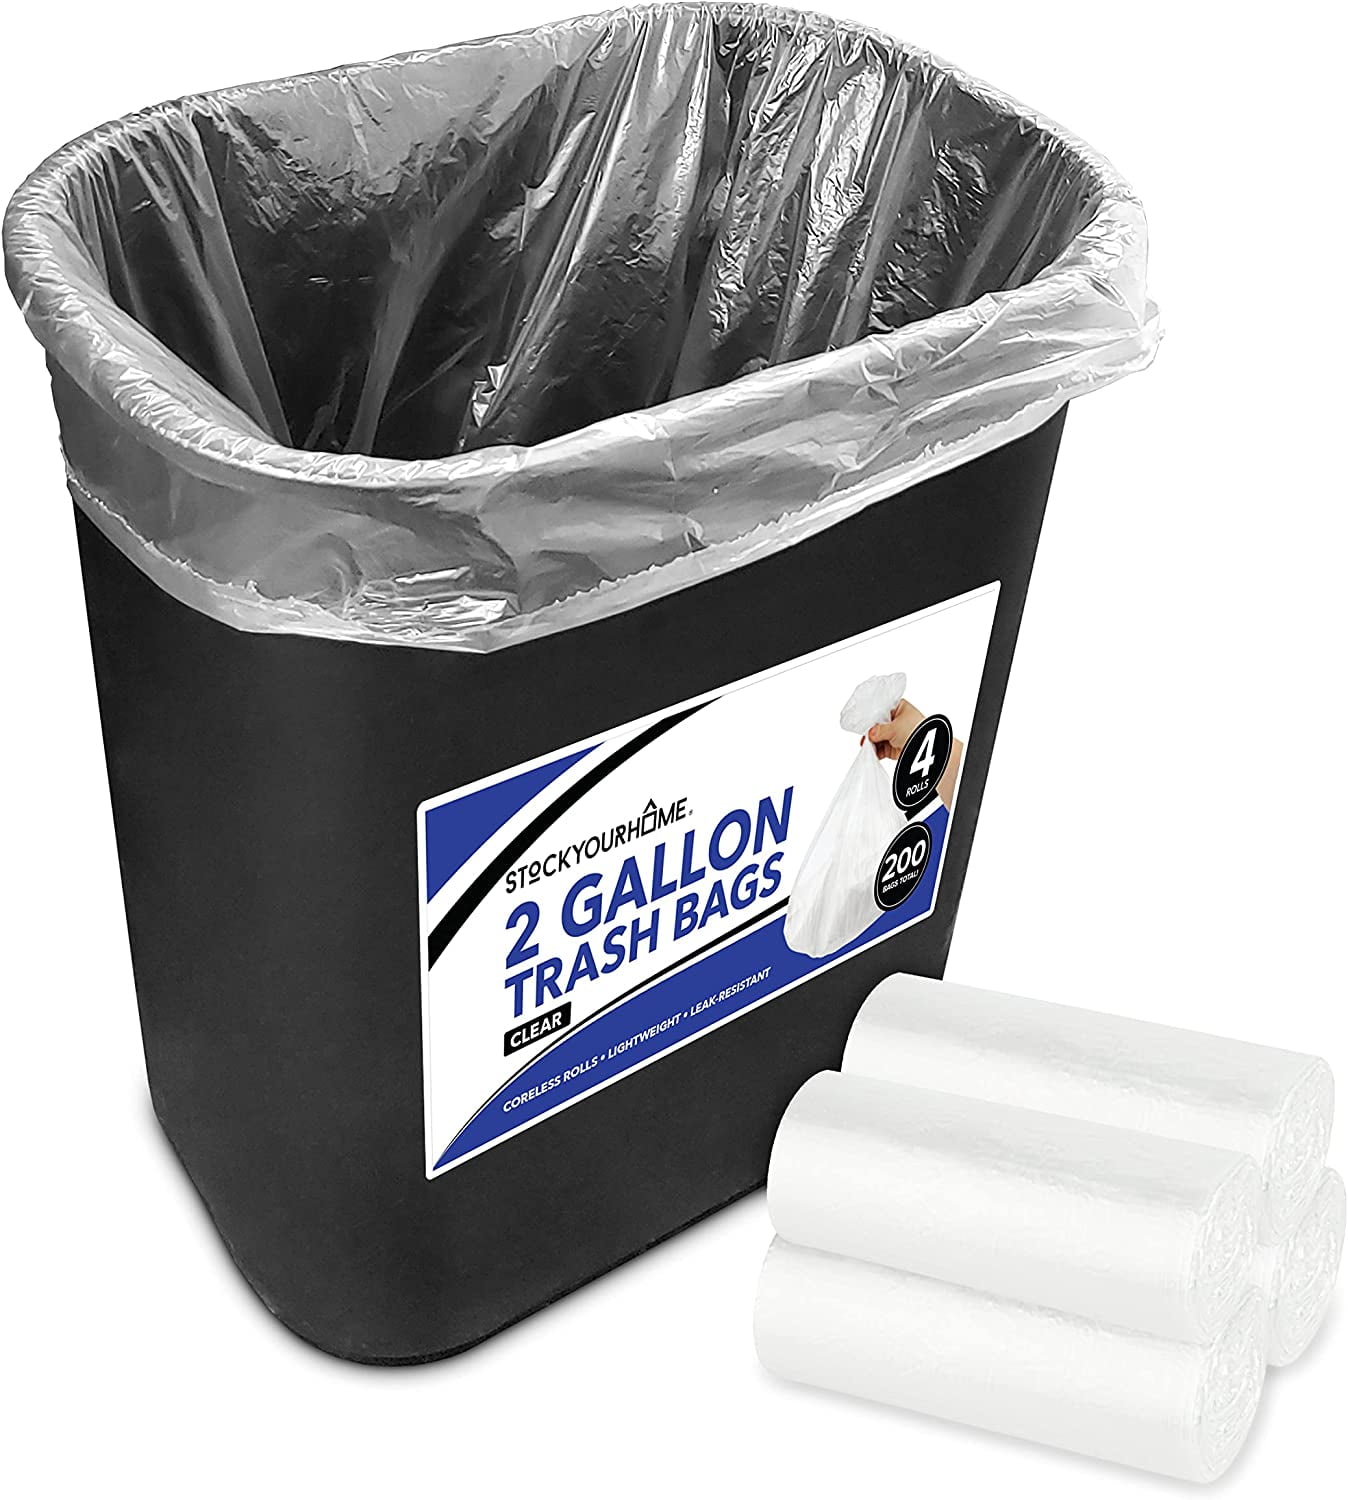 2-4 Gallon Small Trash Bags Bathroom Garbage Bags Value Pack 800